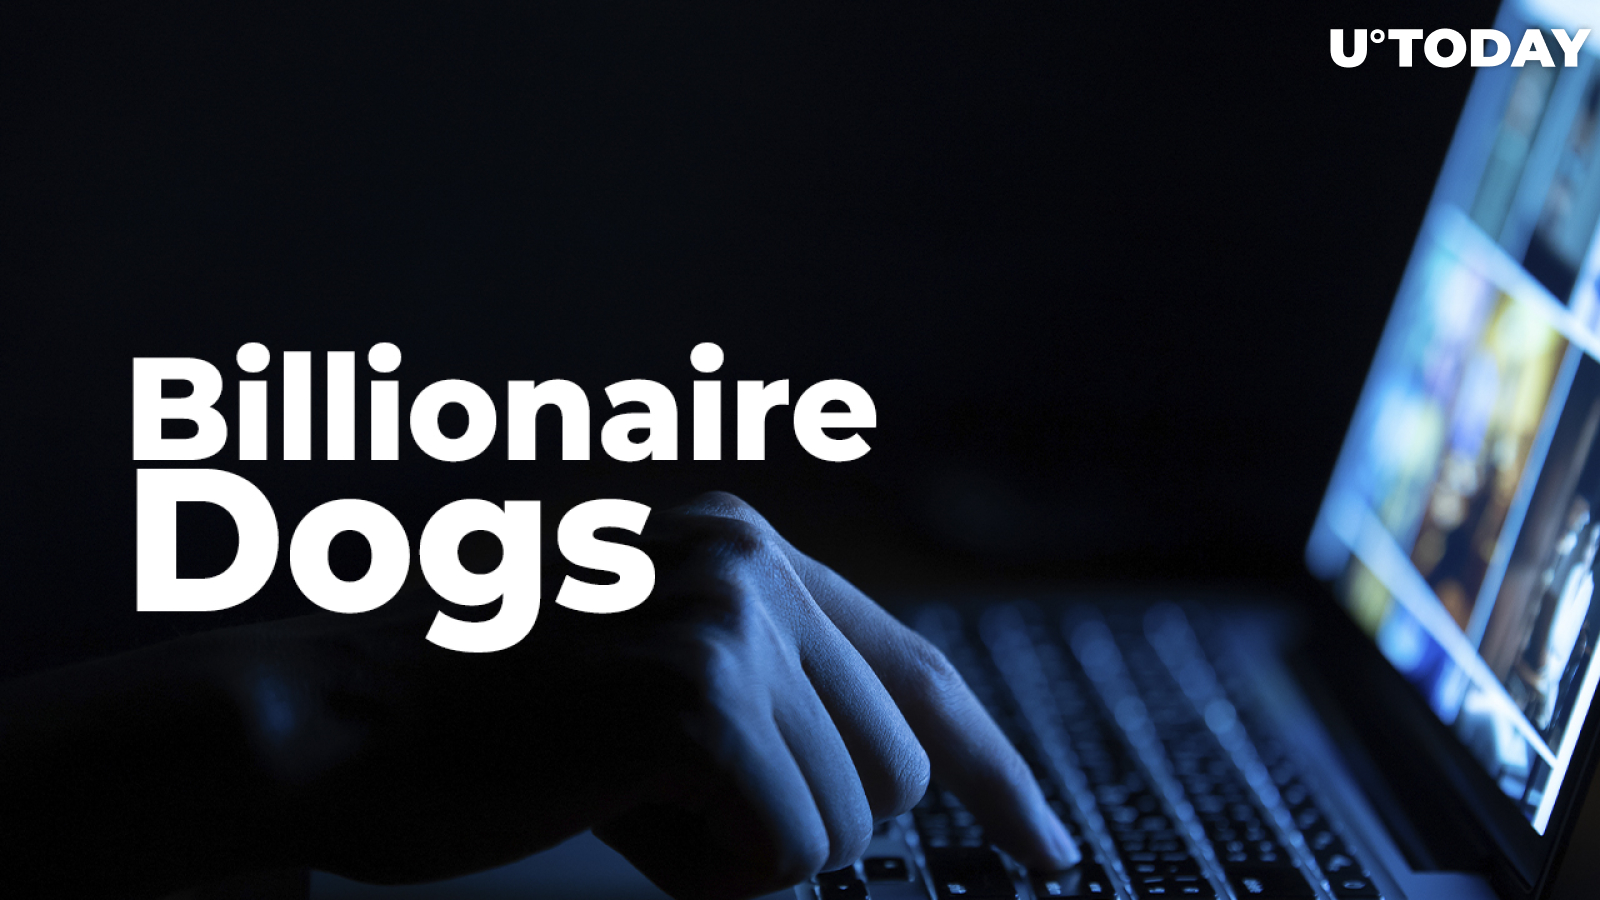 NFT Collection Billionaire Dogs Promoted by Popular French Influencer Scammed Users, 100% of Funds Stolen